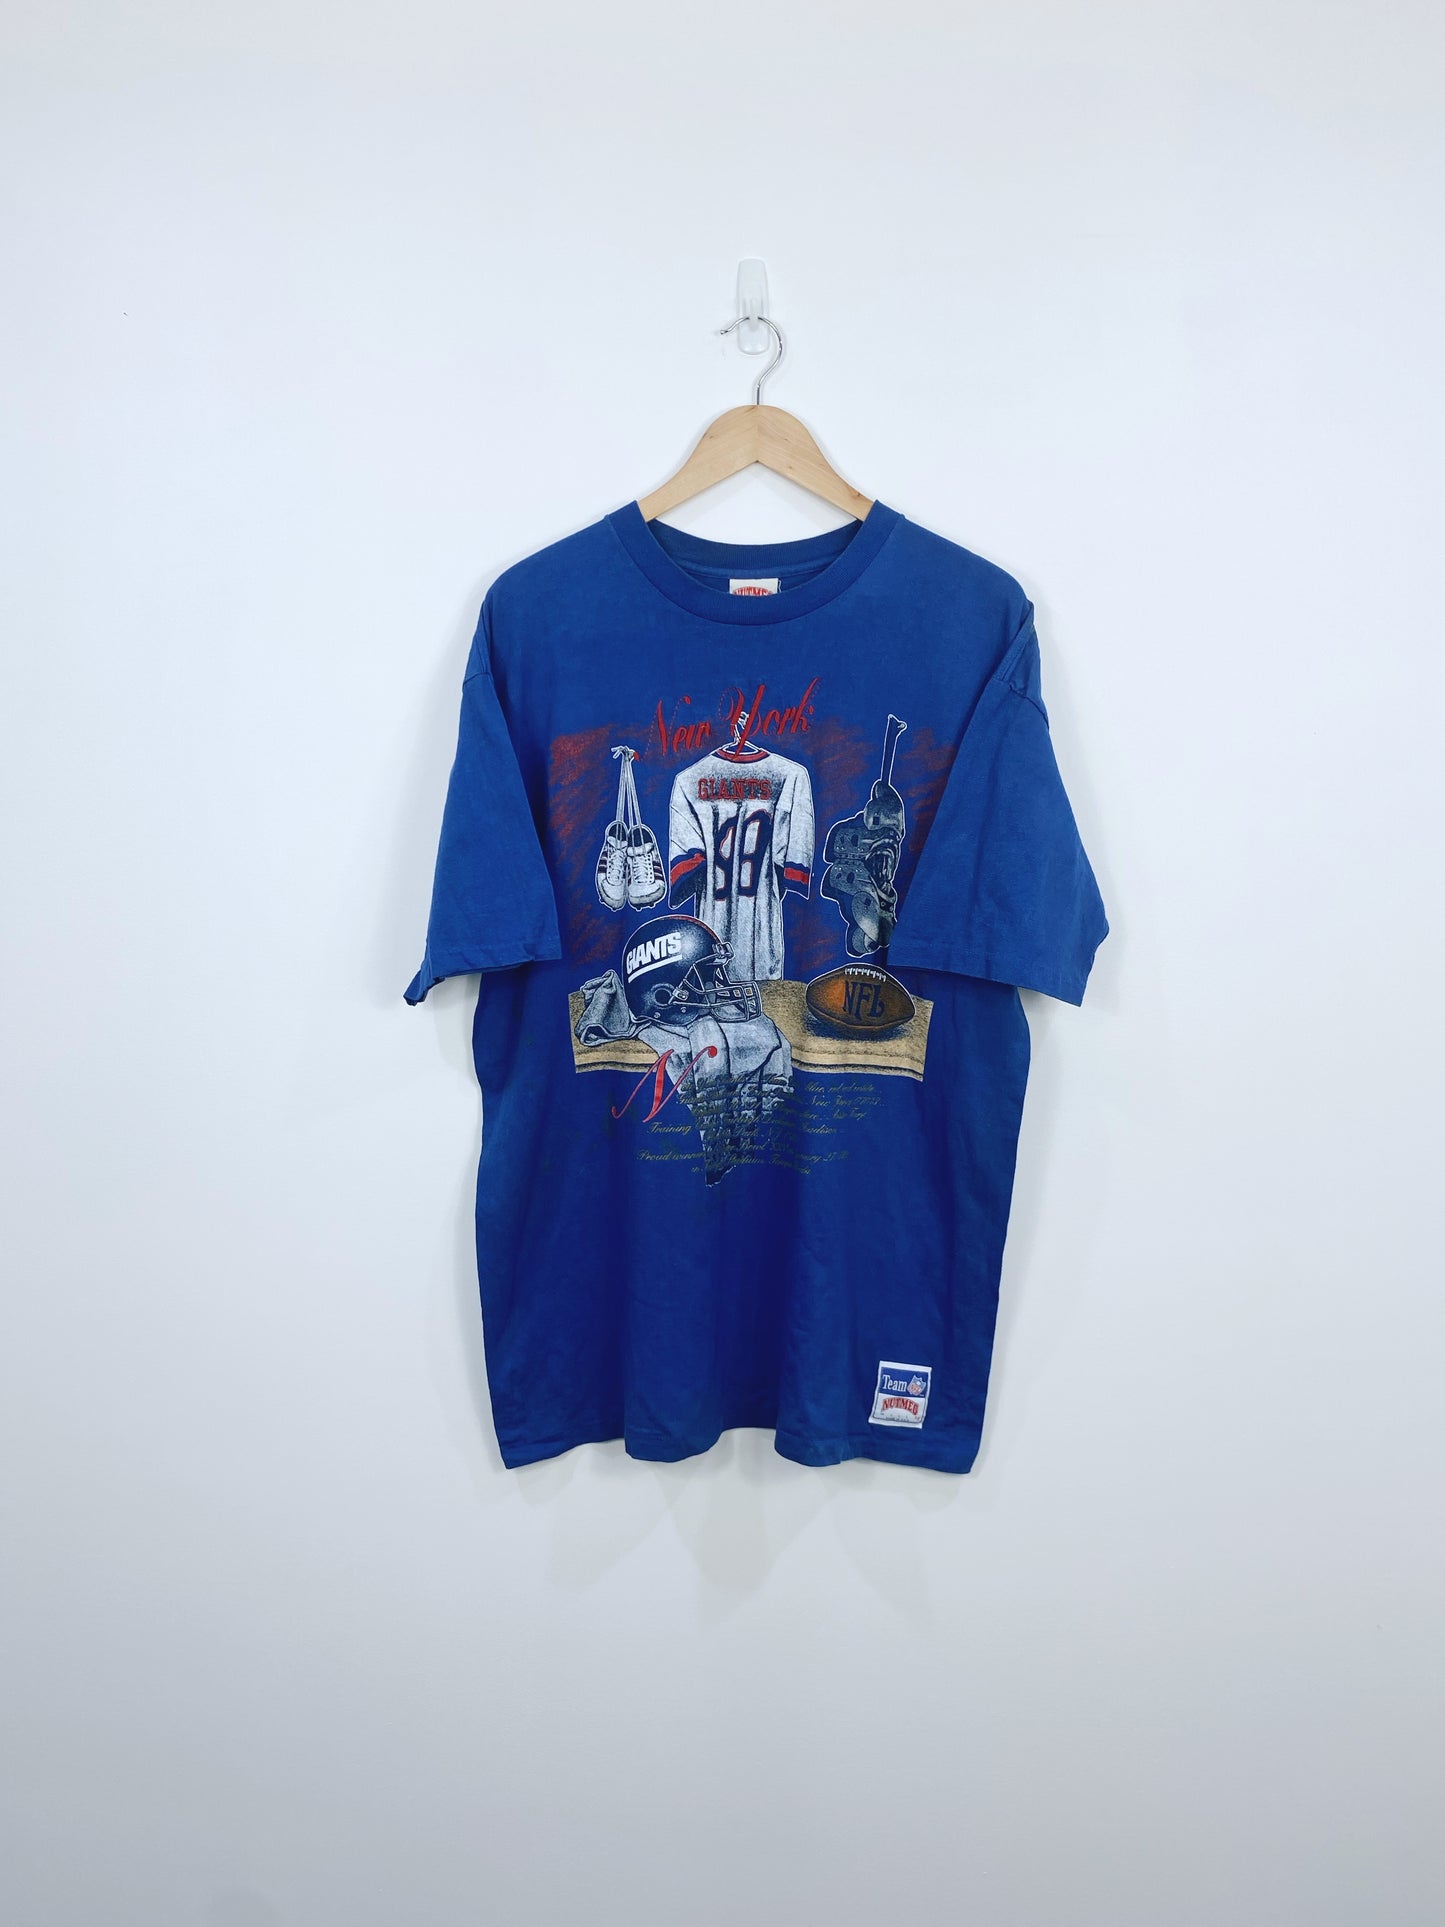 Vintage 1991 New York Giants Embroidered T-shirt L